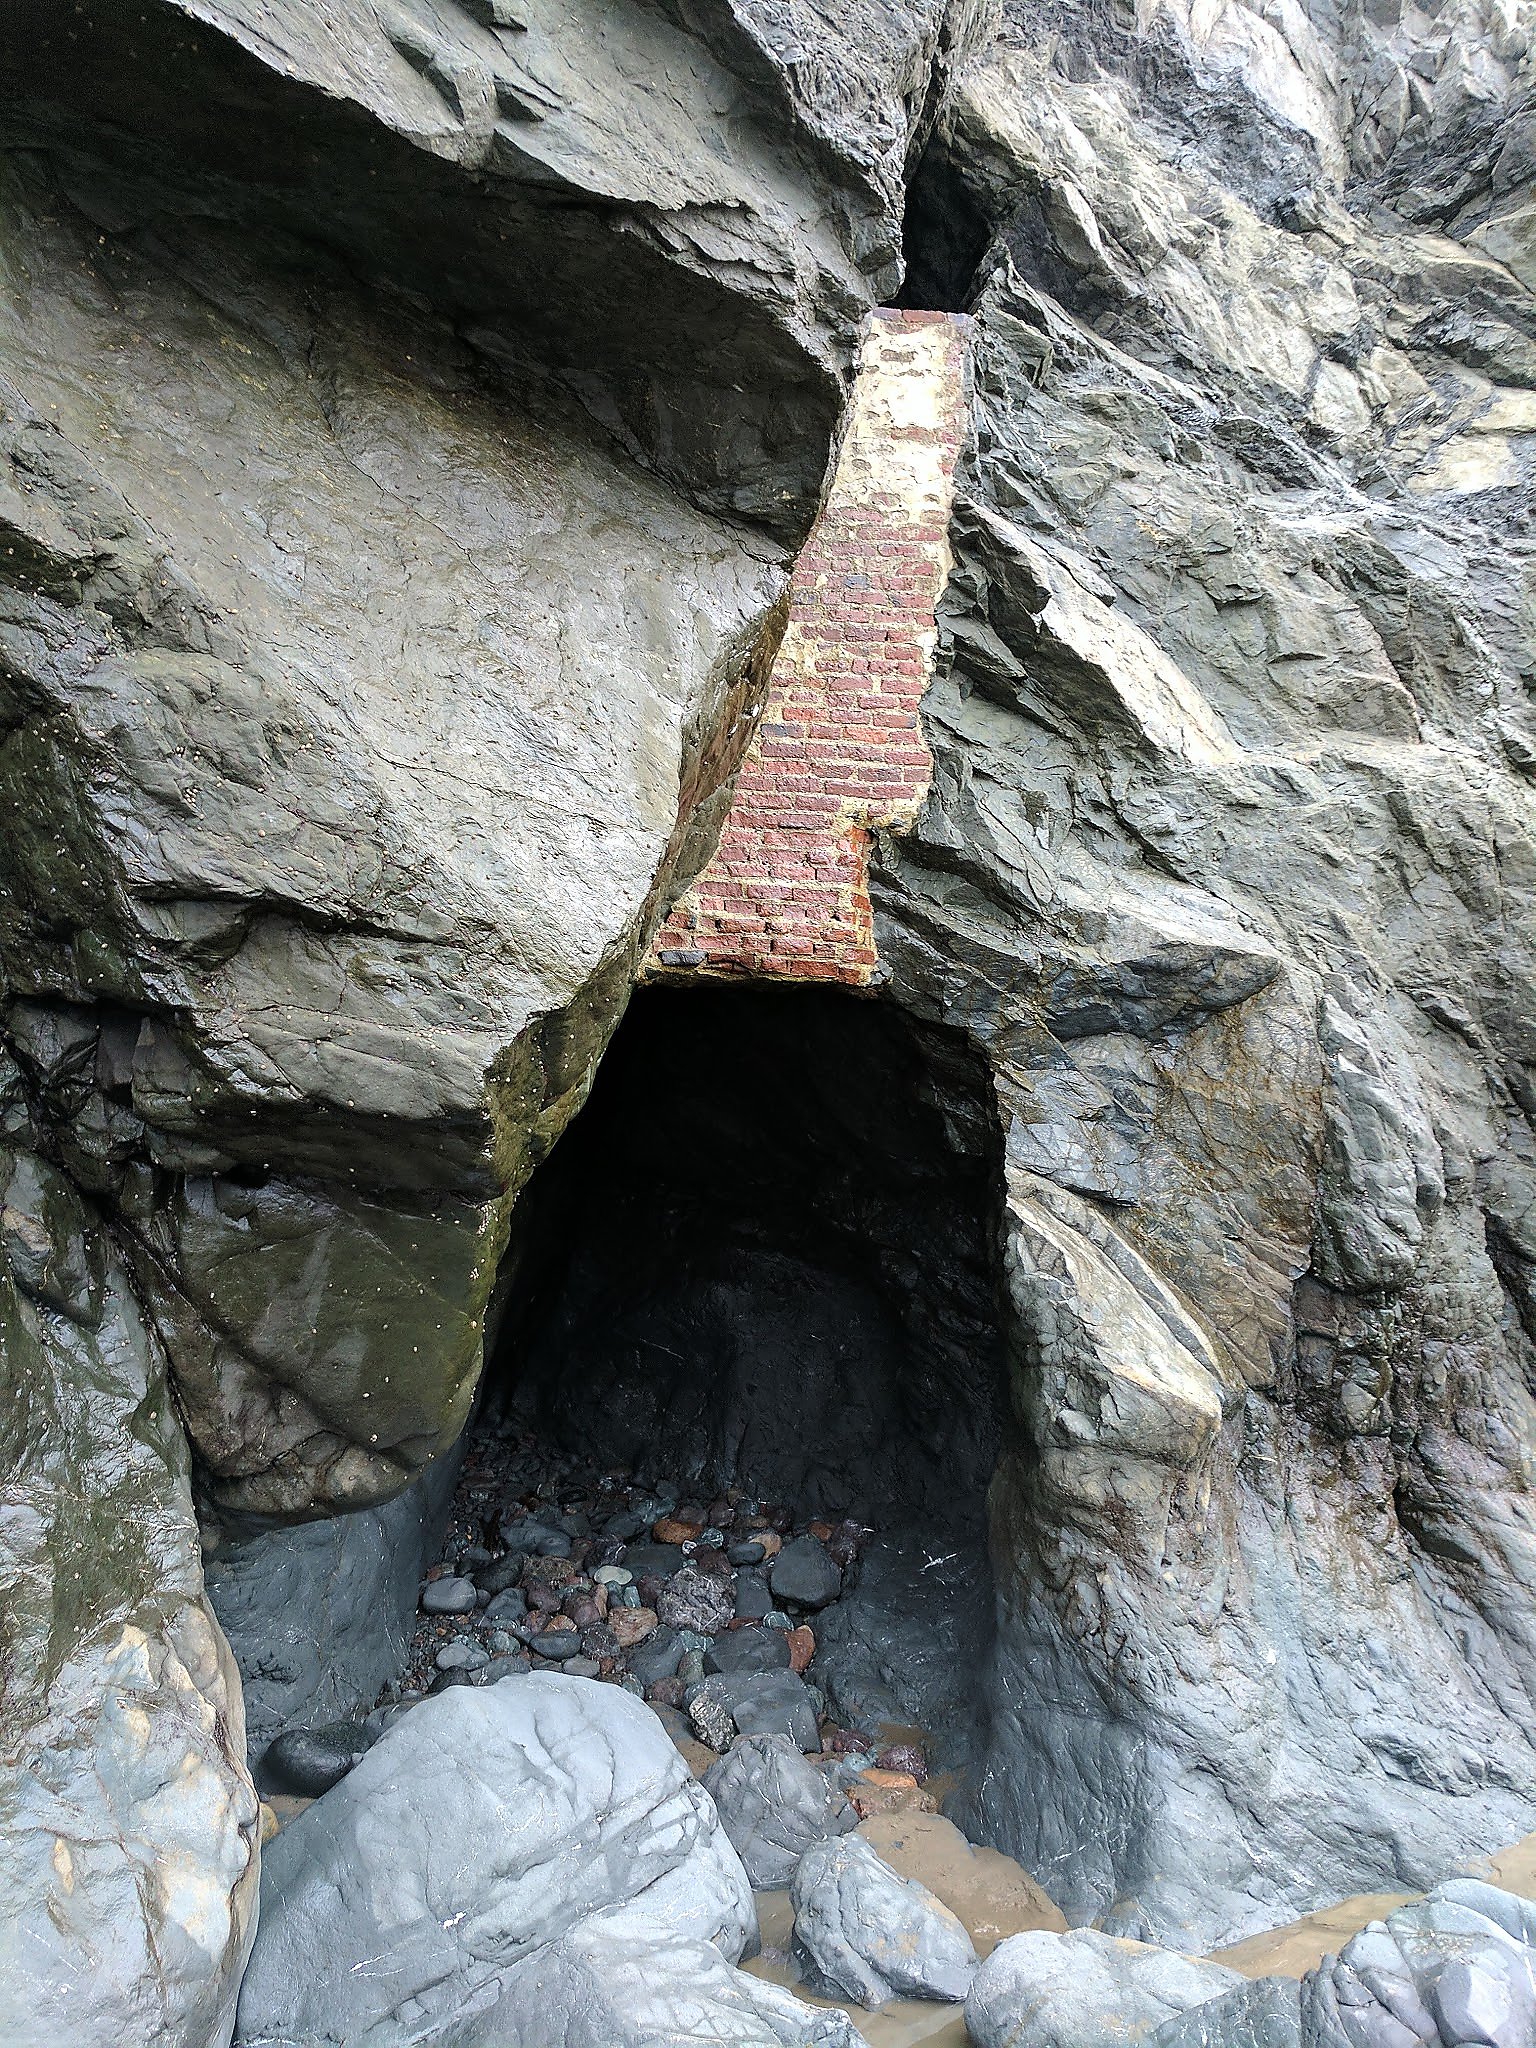 King tides aid exploration of SF's hidden old coal mine - SFGate1536 x 2048